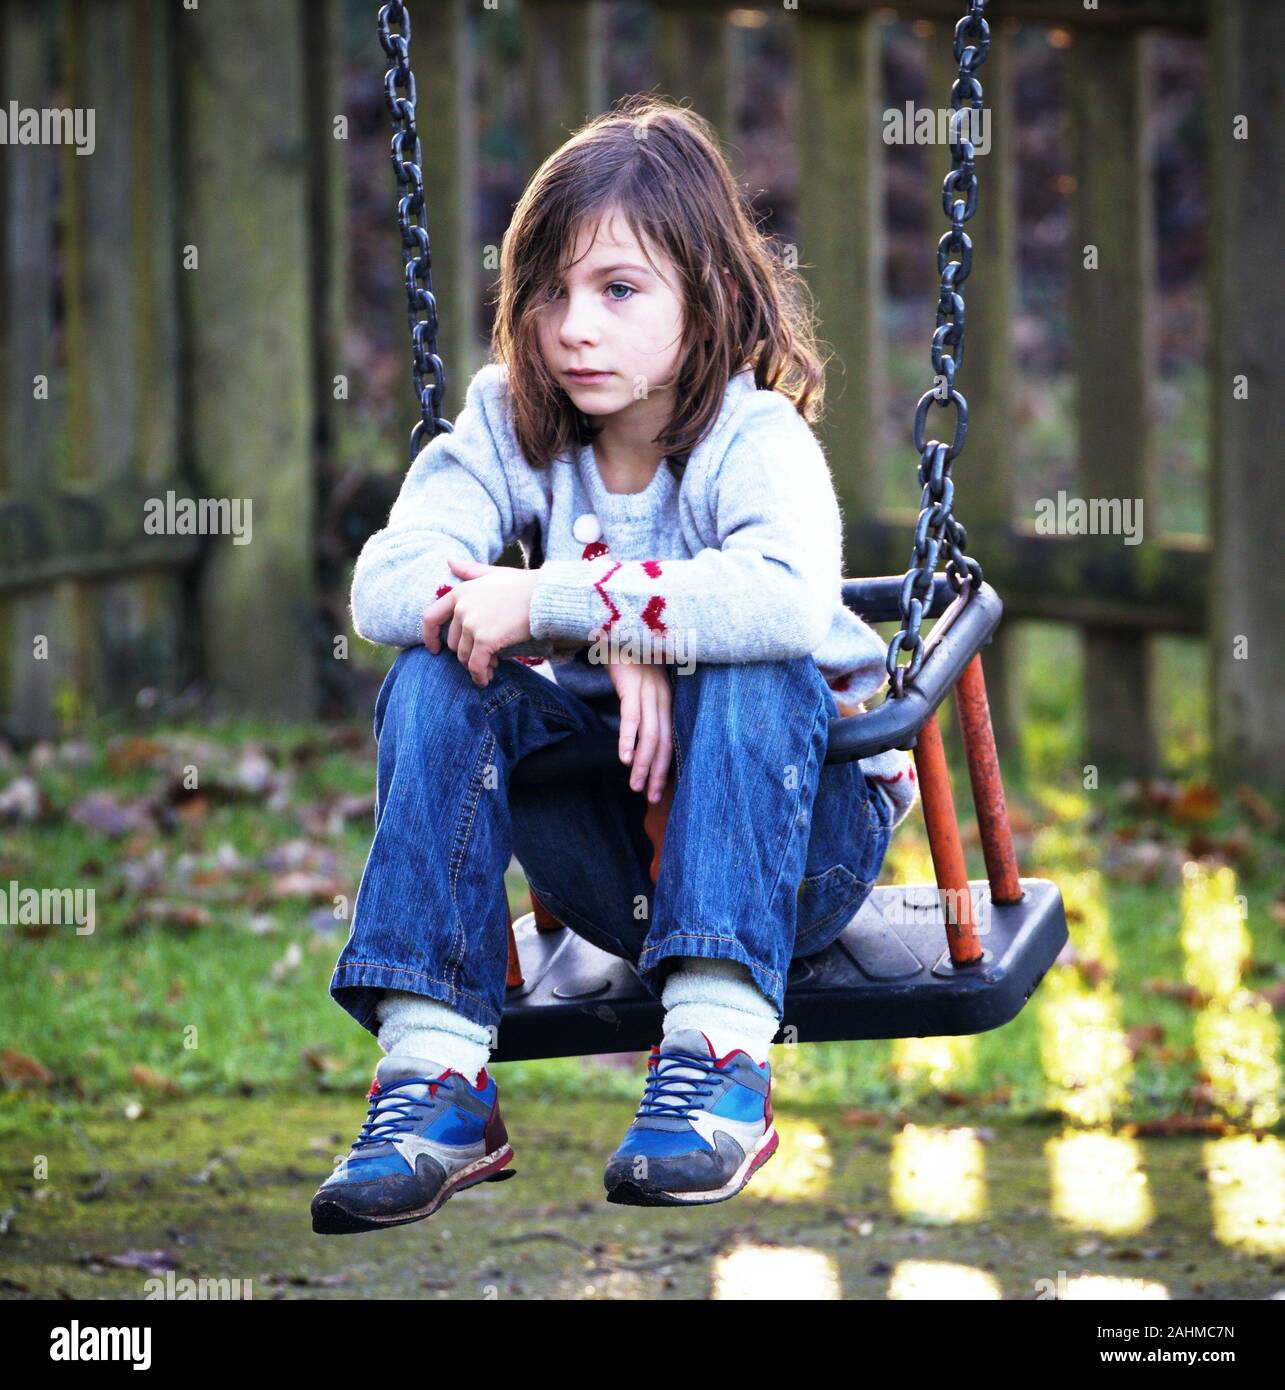 Girl looking thoughtful on a swing in a playground Stock Photo